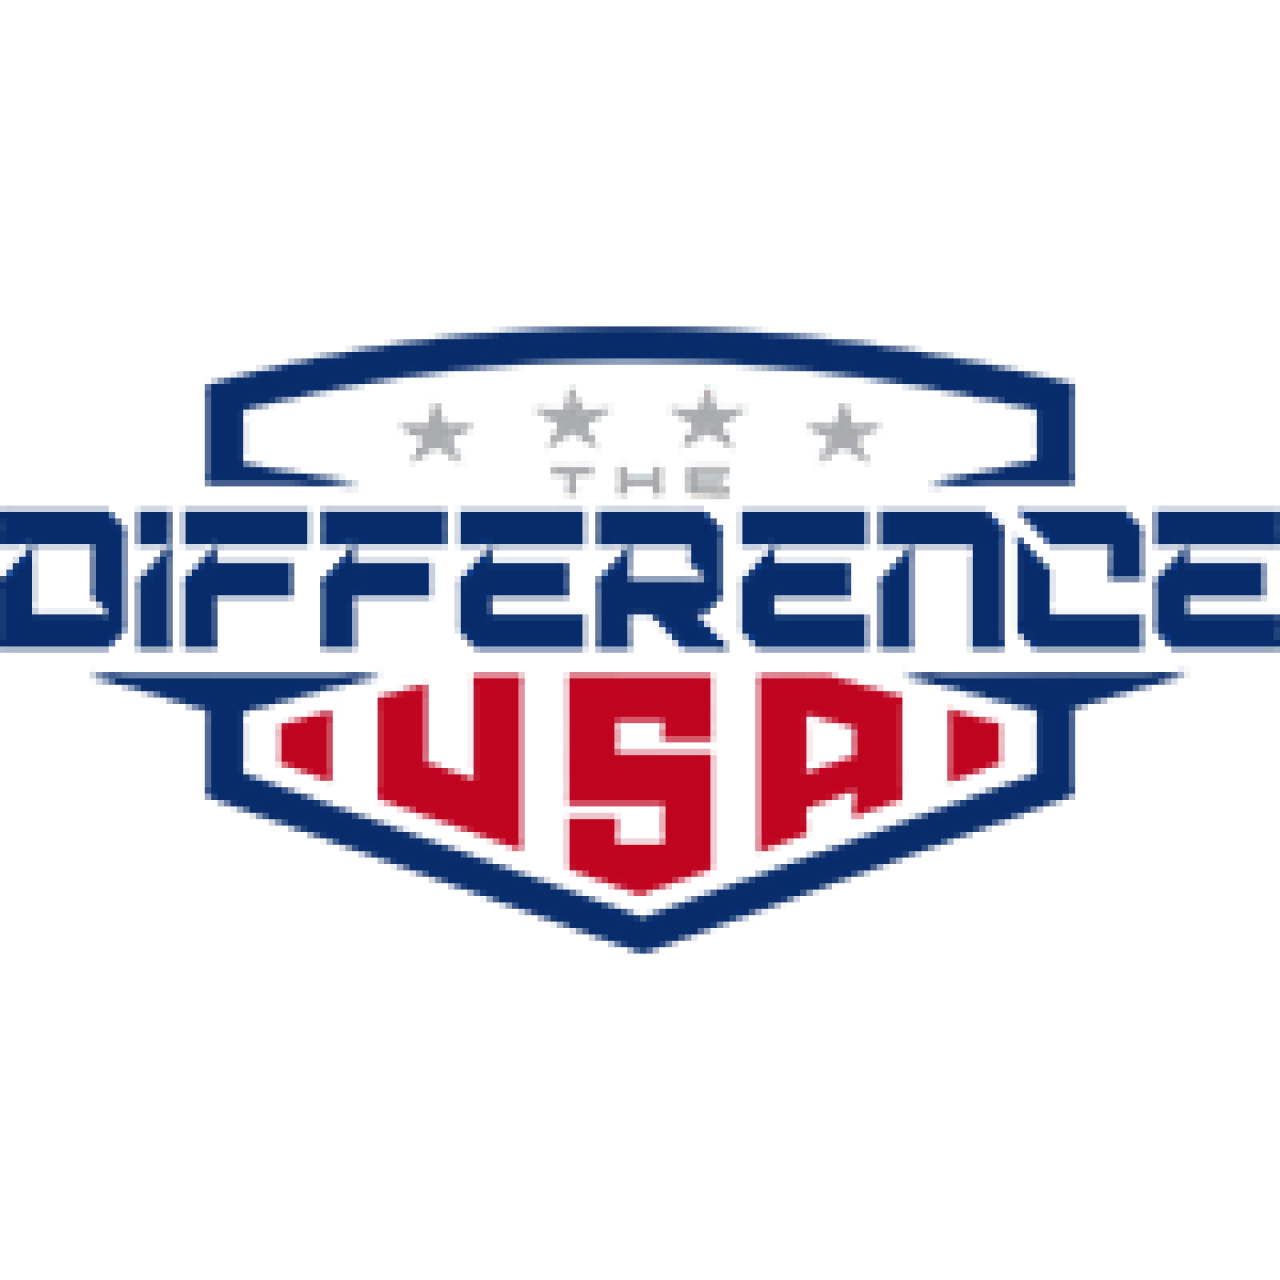 The Difference USA logo